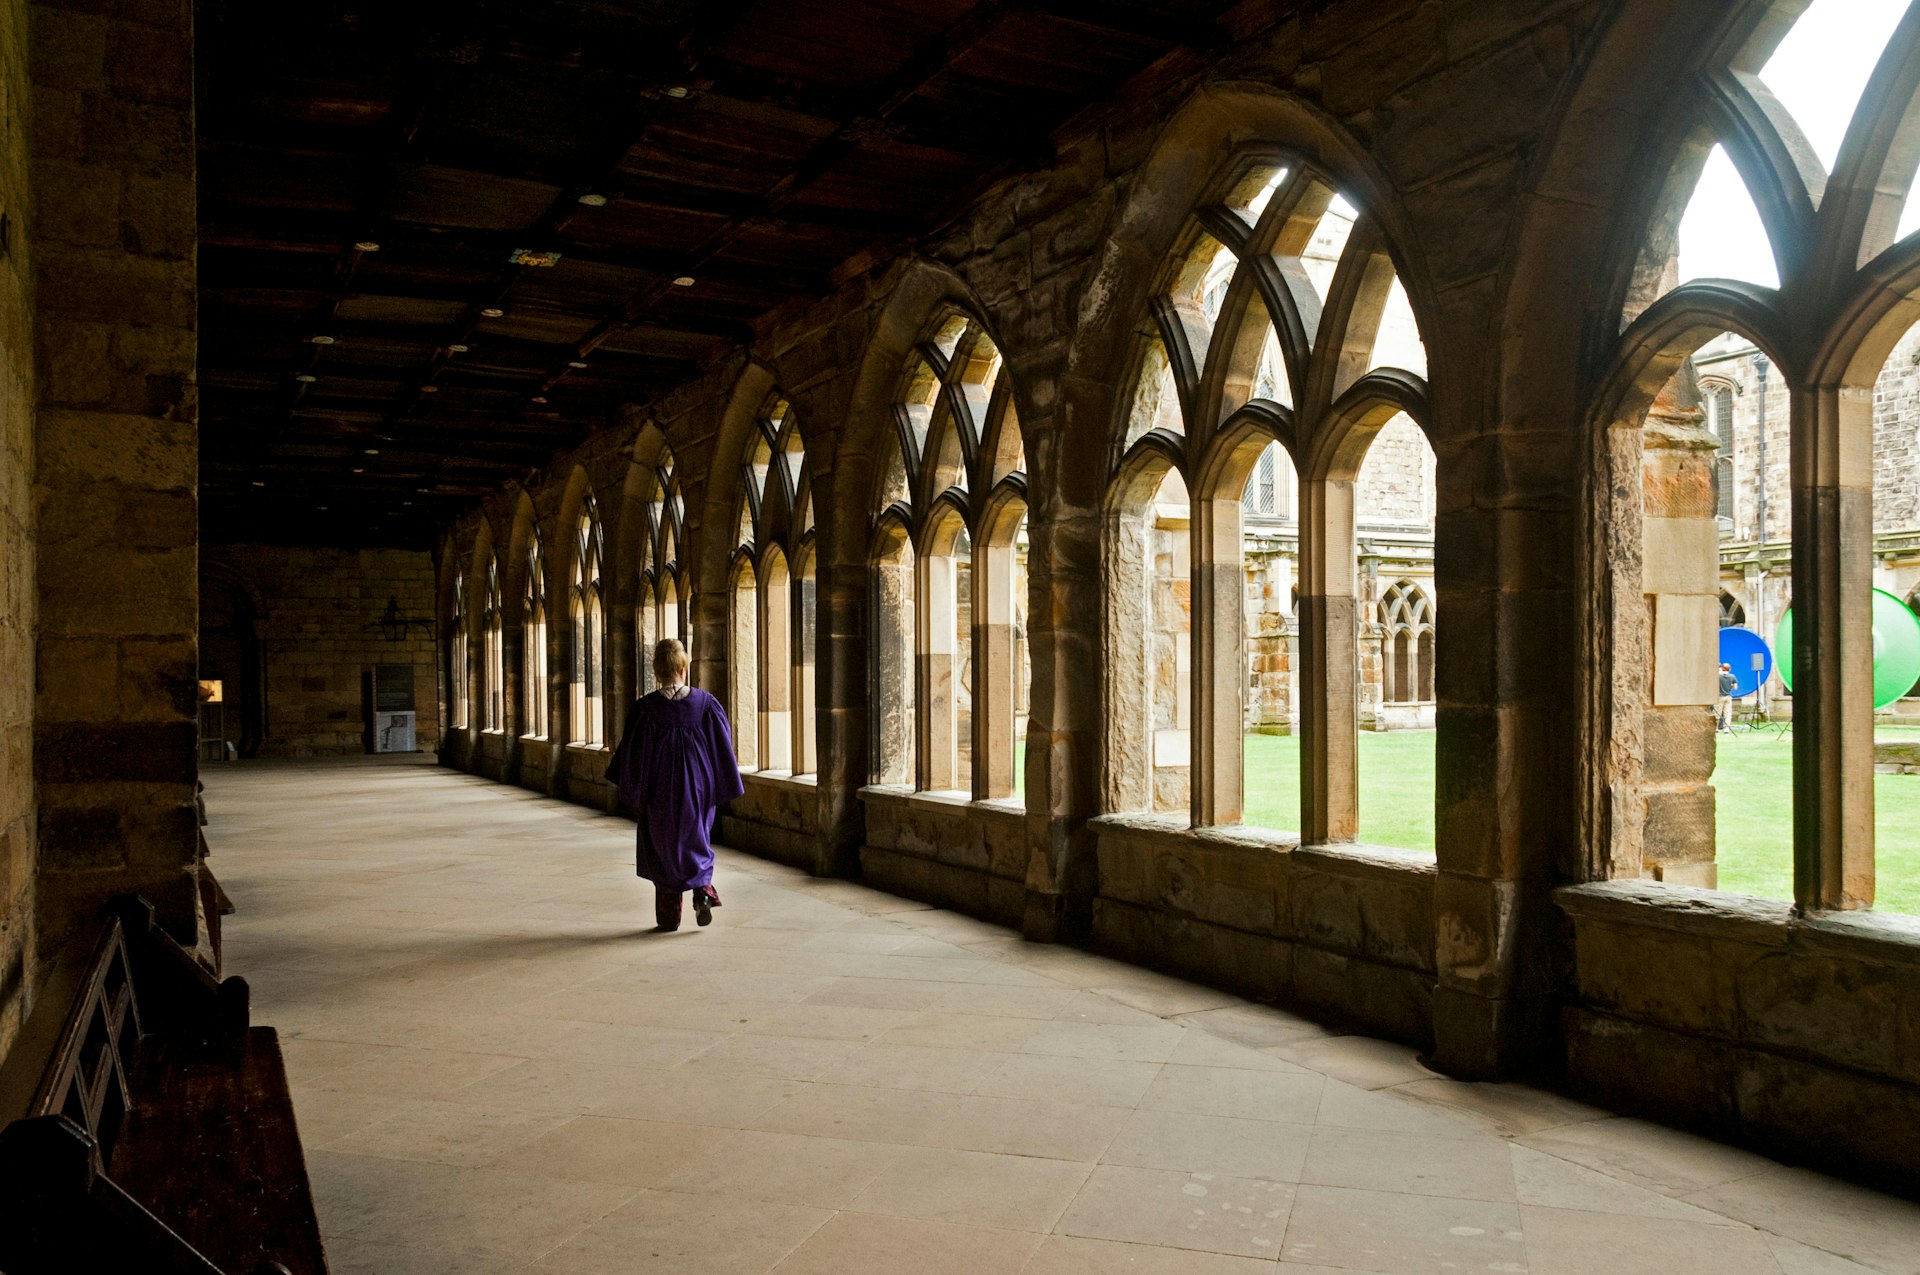 A person walks down a corridor in the cloisters of Durham Cathedral, Durham, England, United Kingdom